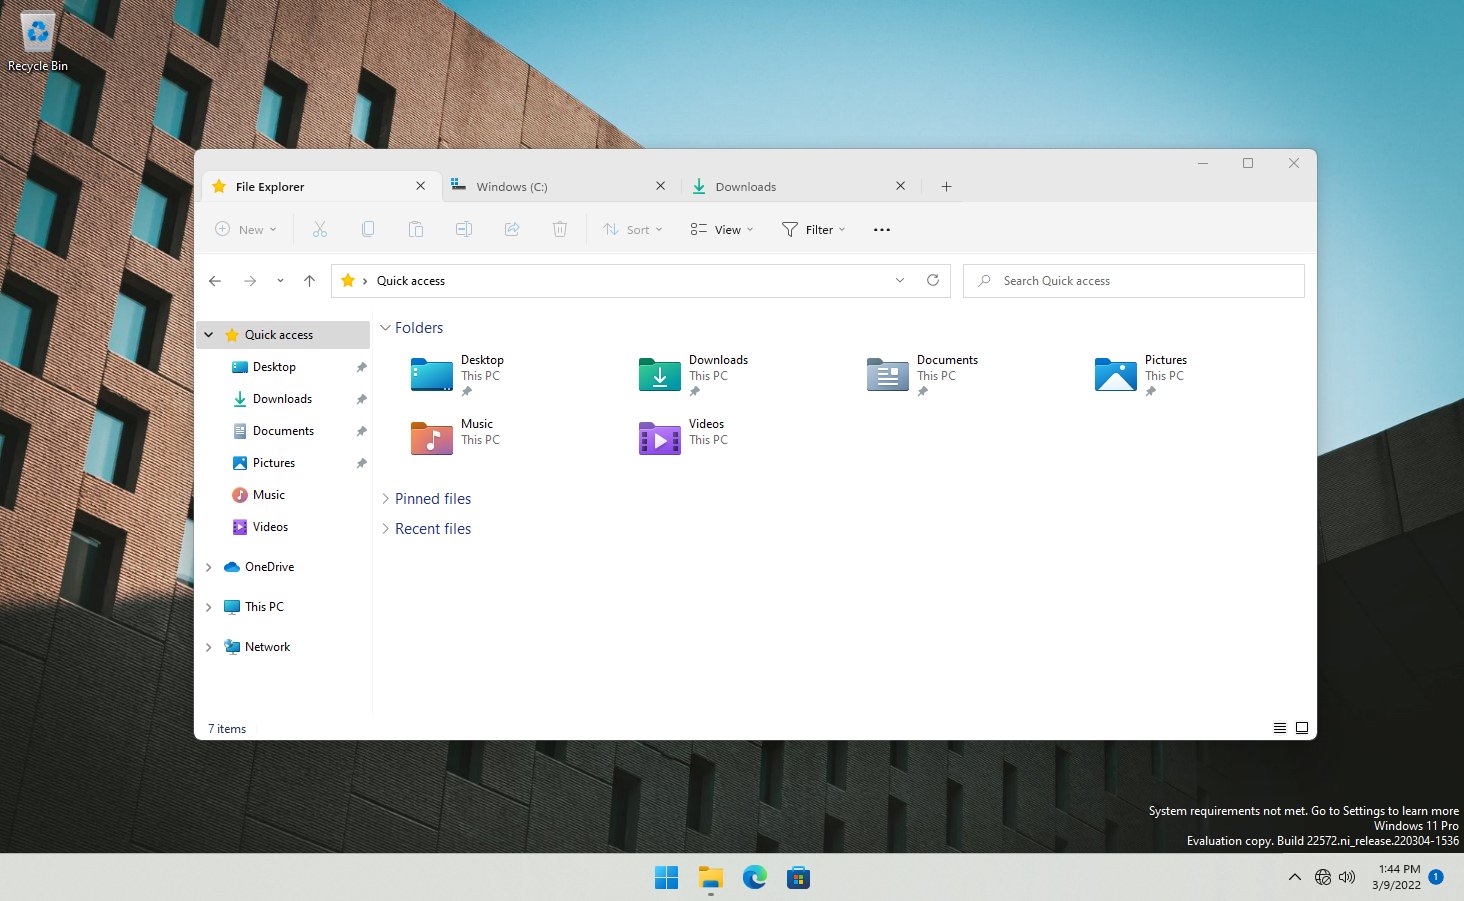 How to enable the new File Explorer tabs in build 22572 thumbnail